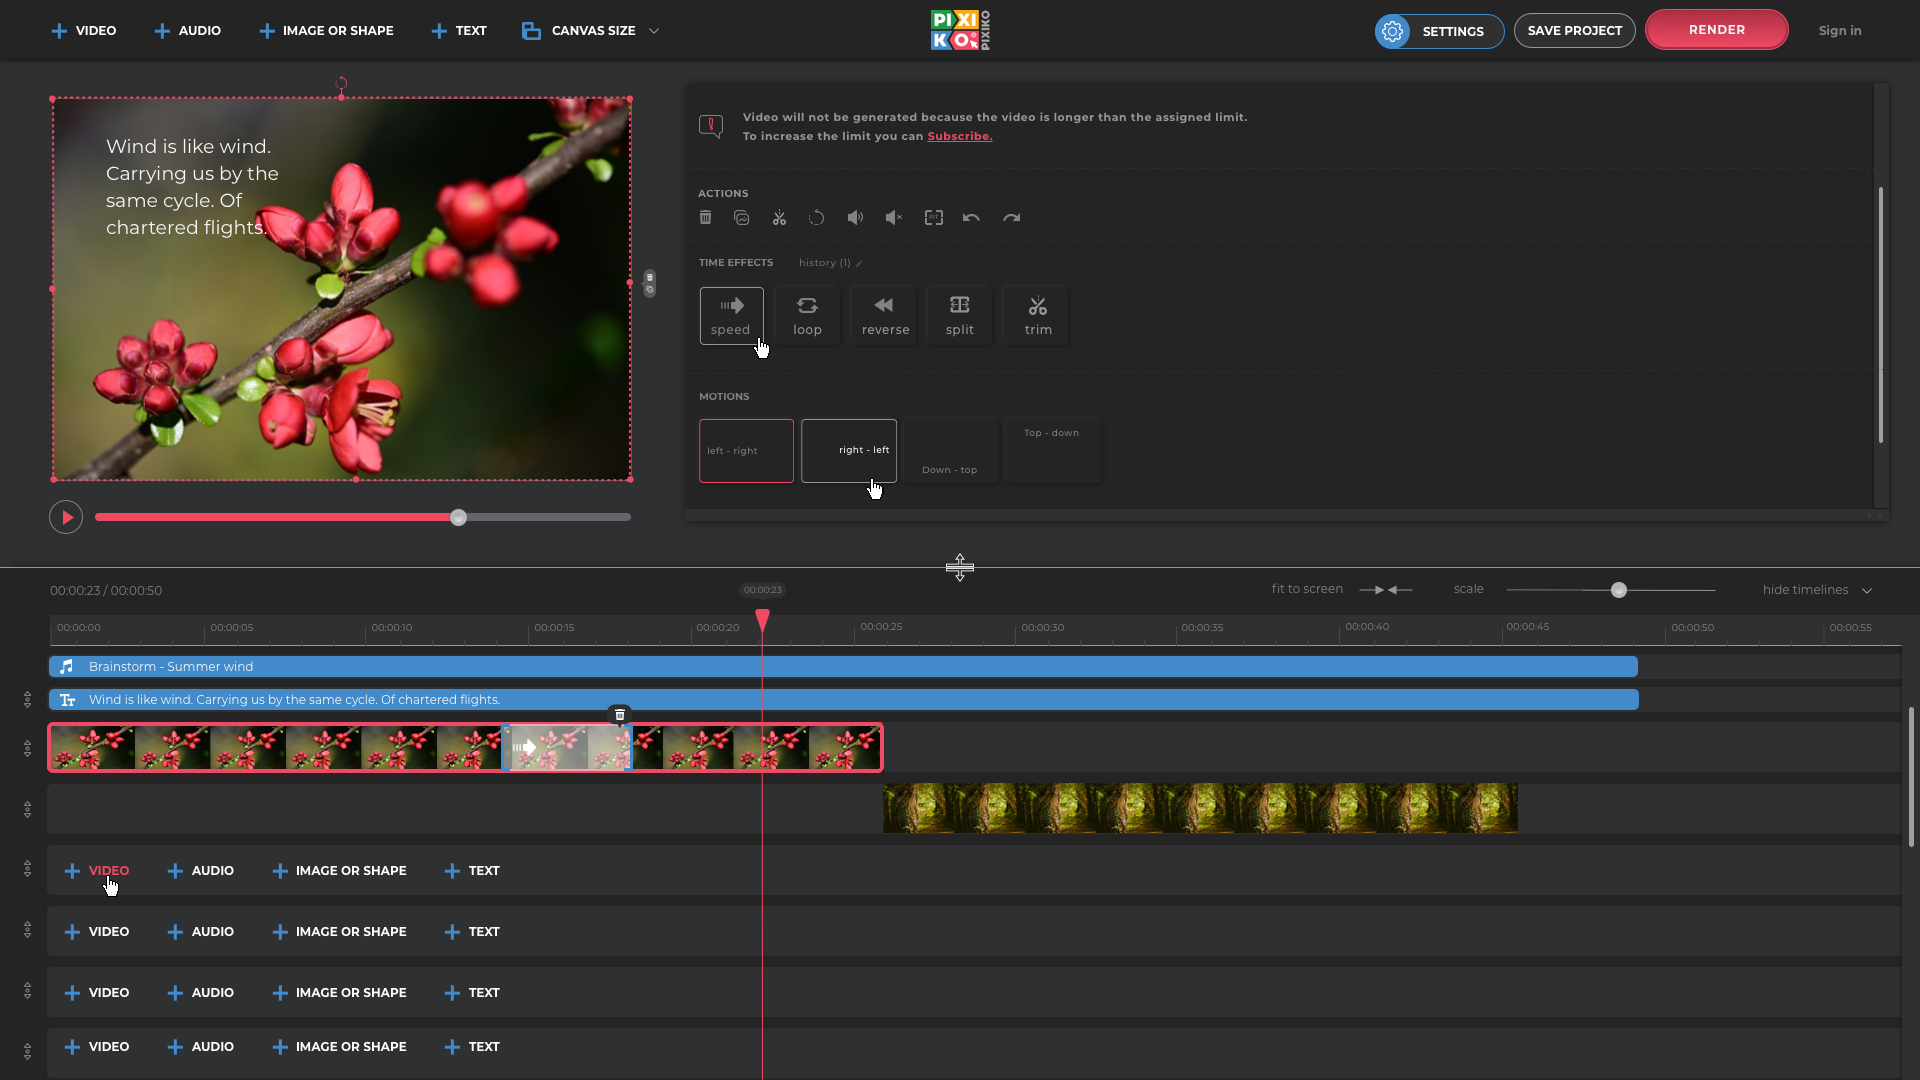 A brief history of Pixiko - the online video editor and maker that could